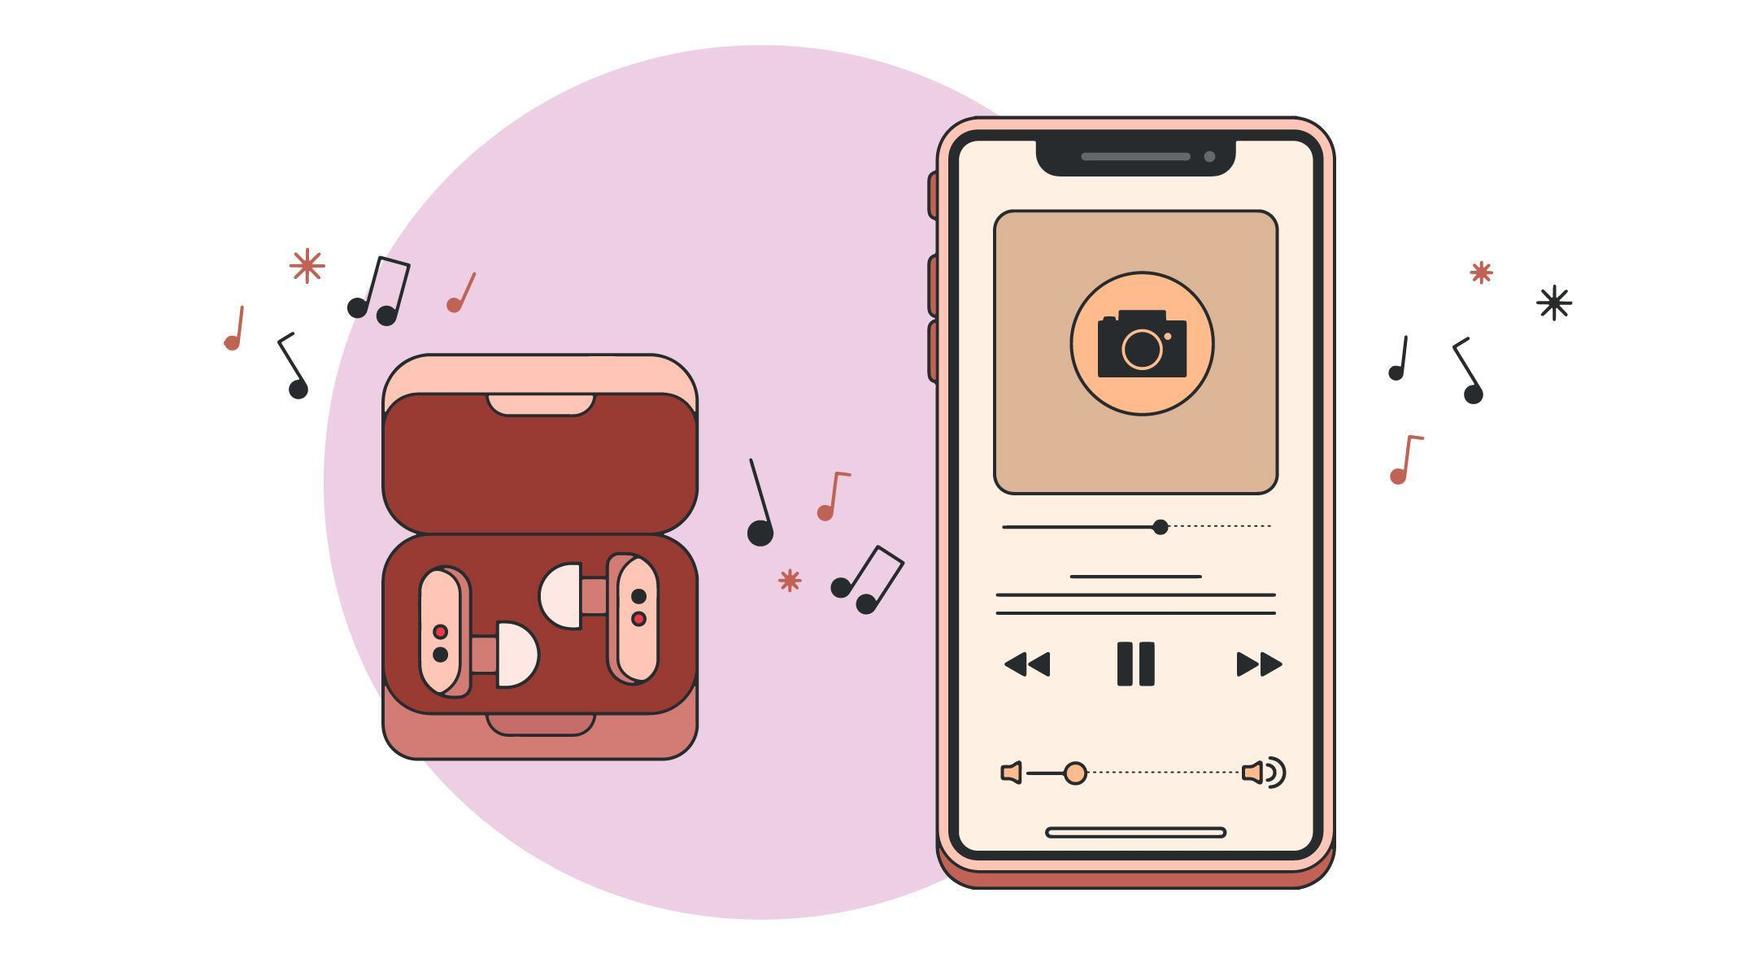 Music Player or Phone and Headphones Vector